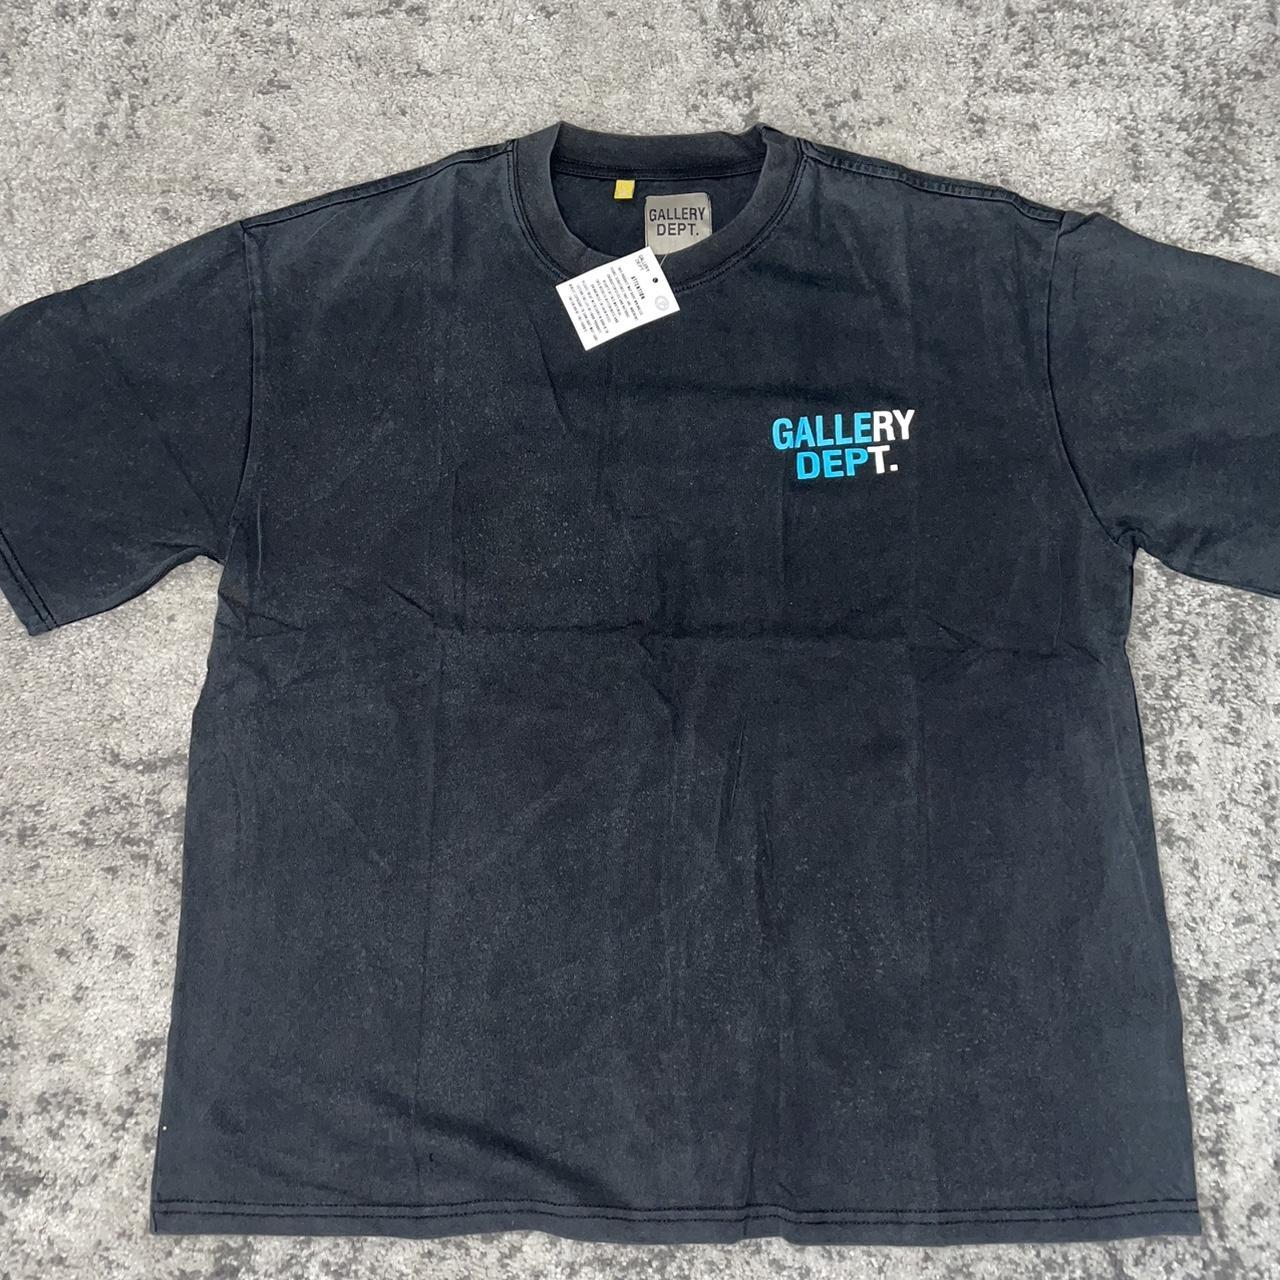 Gallery dept t shirt Size S-Xl ✓ Same day shipping... - Depop